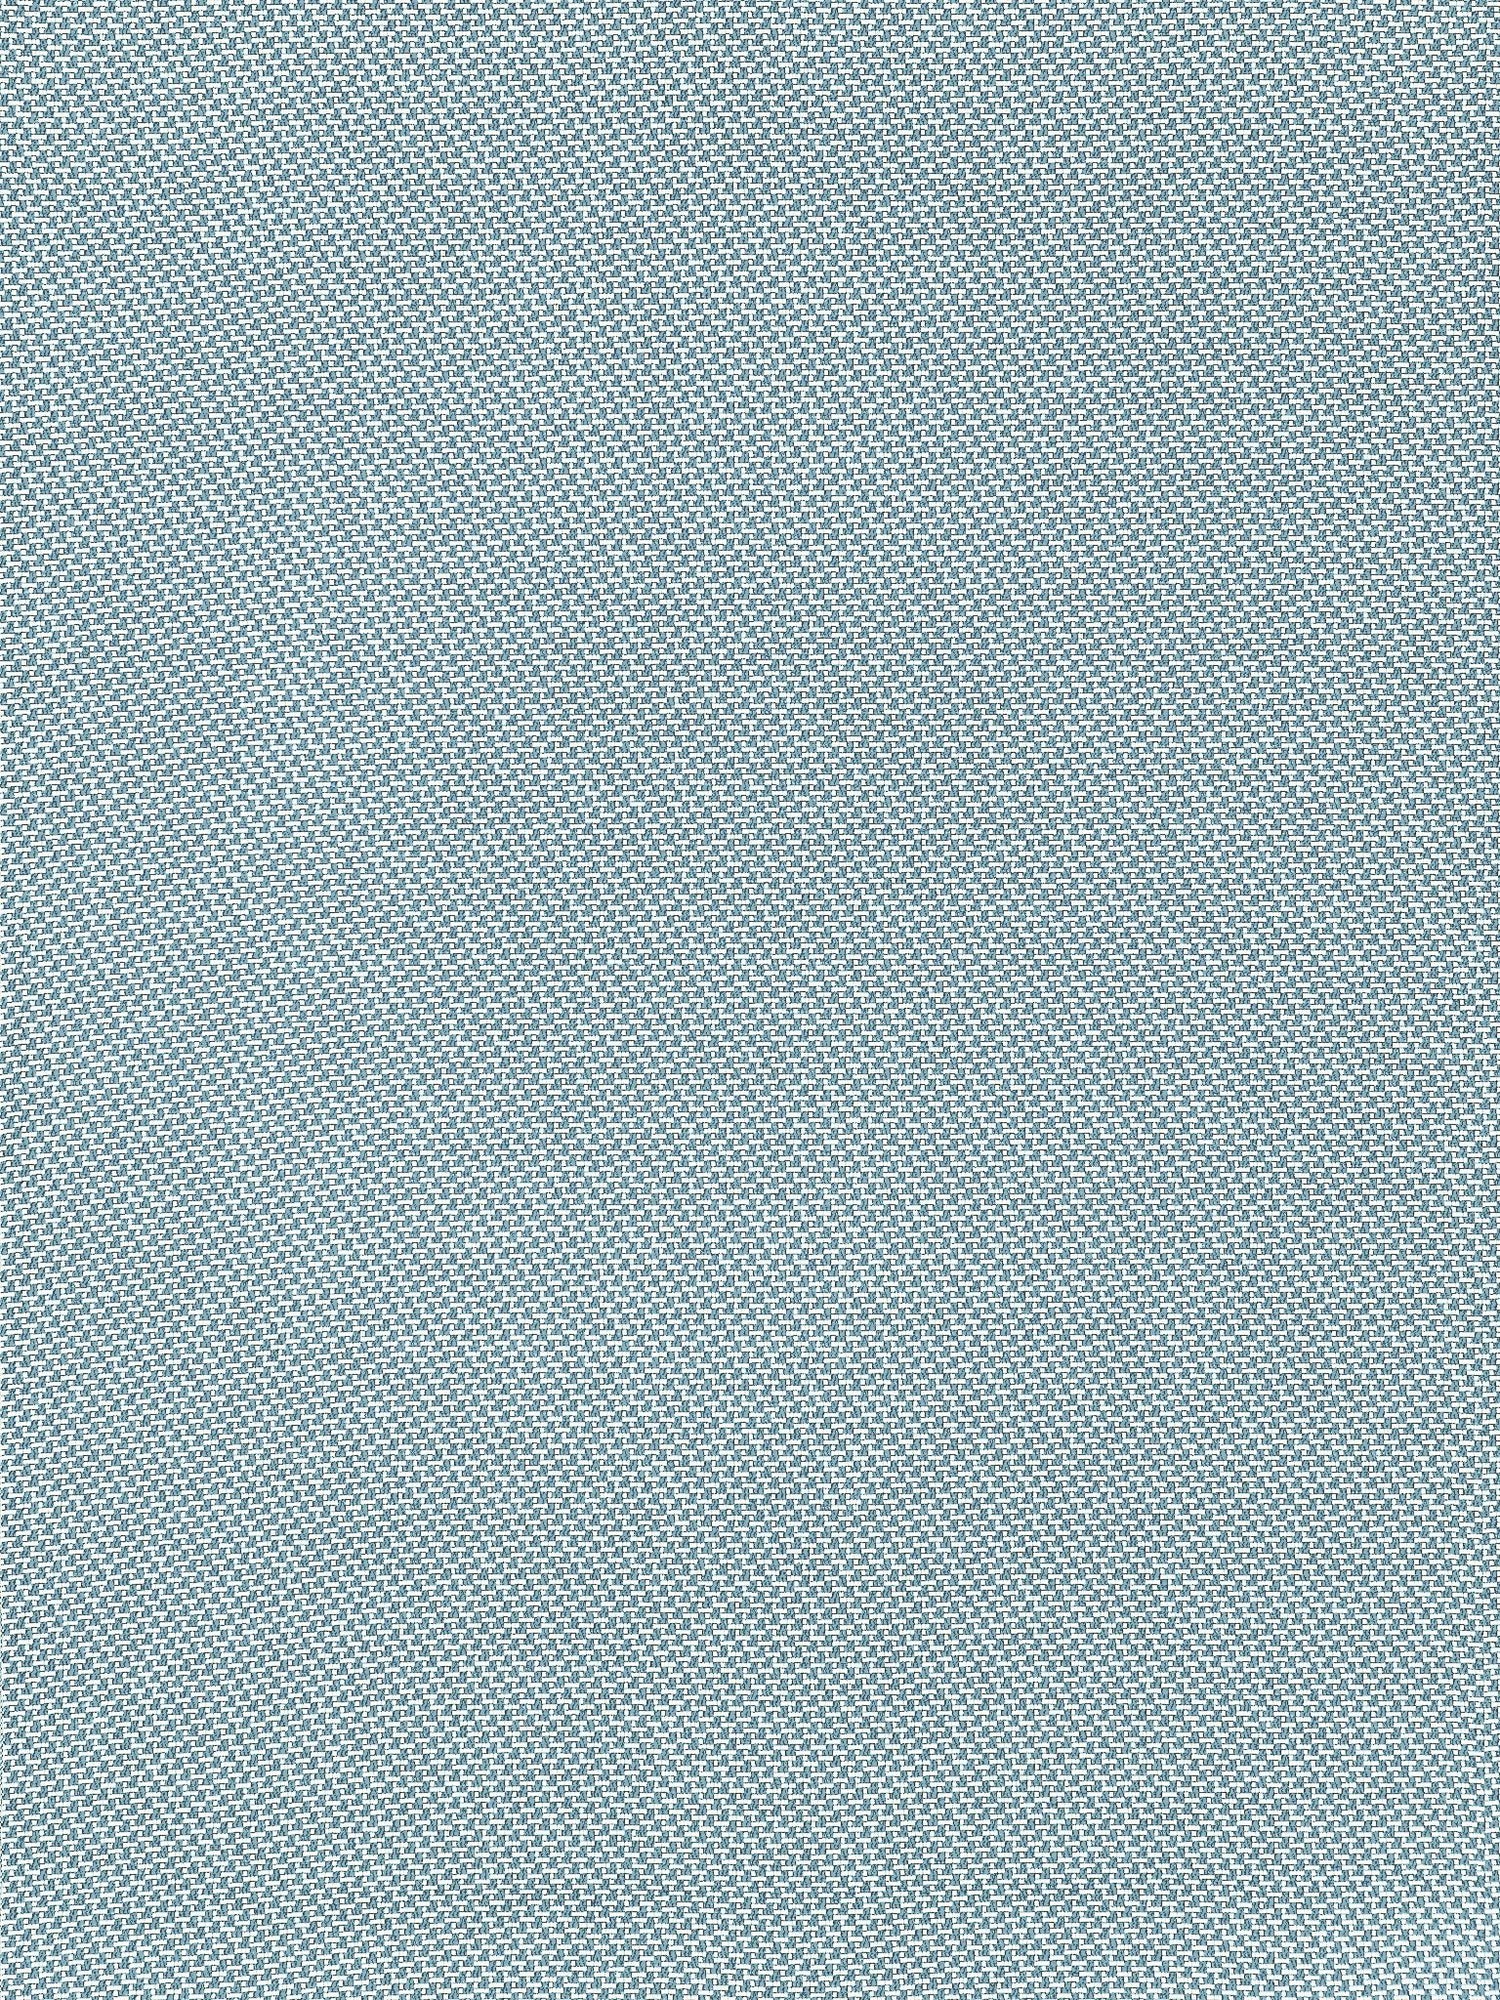 North Downs fabric in sky color - pattern number EY 000713ND - by Scalamandre in the Old World Weavers collection